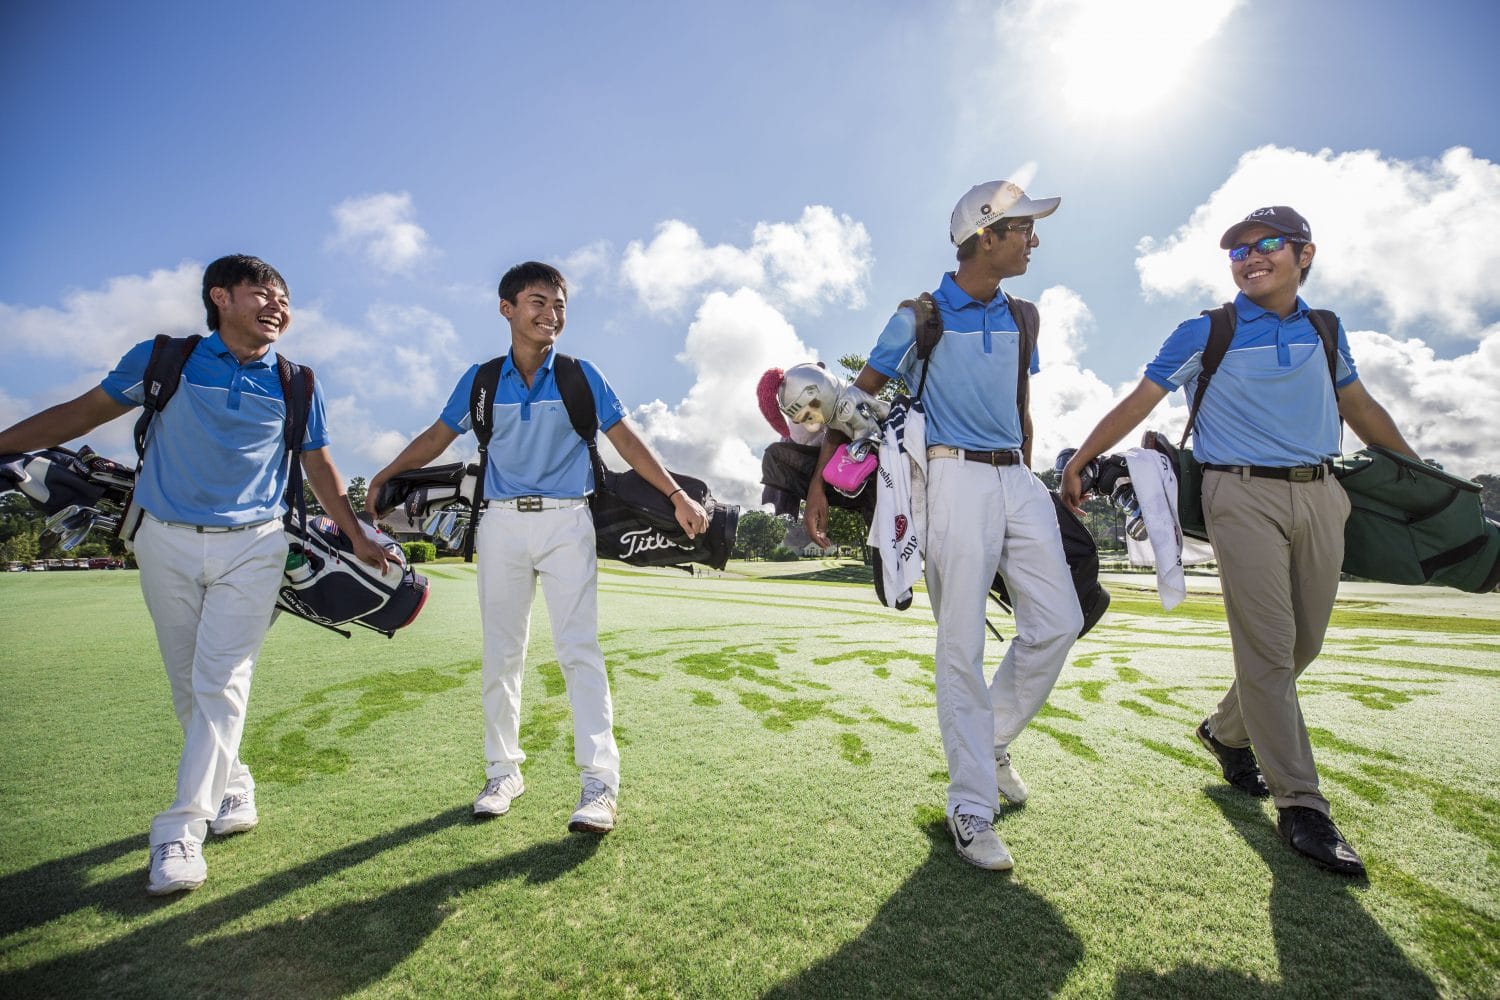 Four IJGA student-athletes in blue polos walk together on the golf course holding their bags